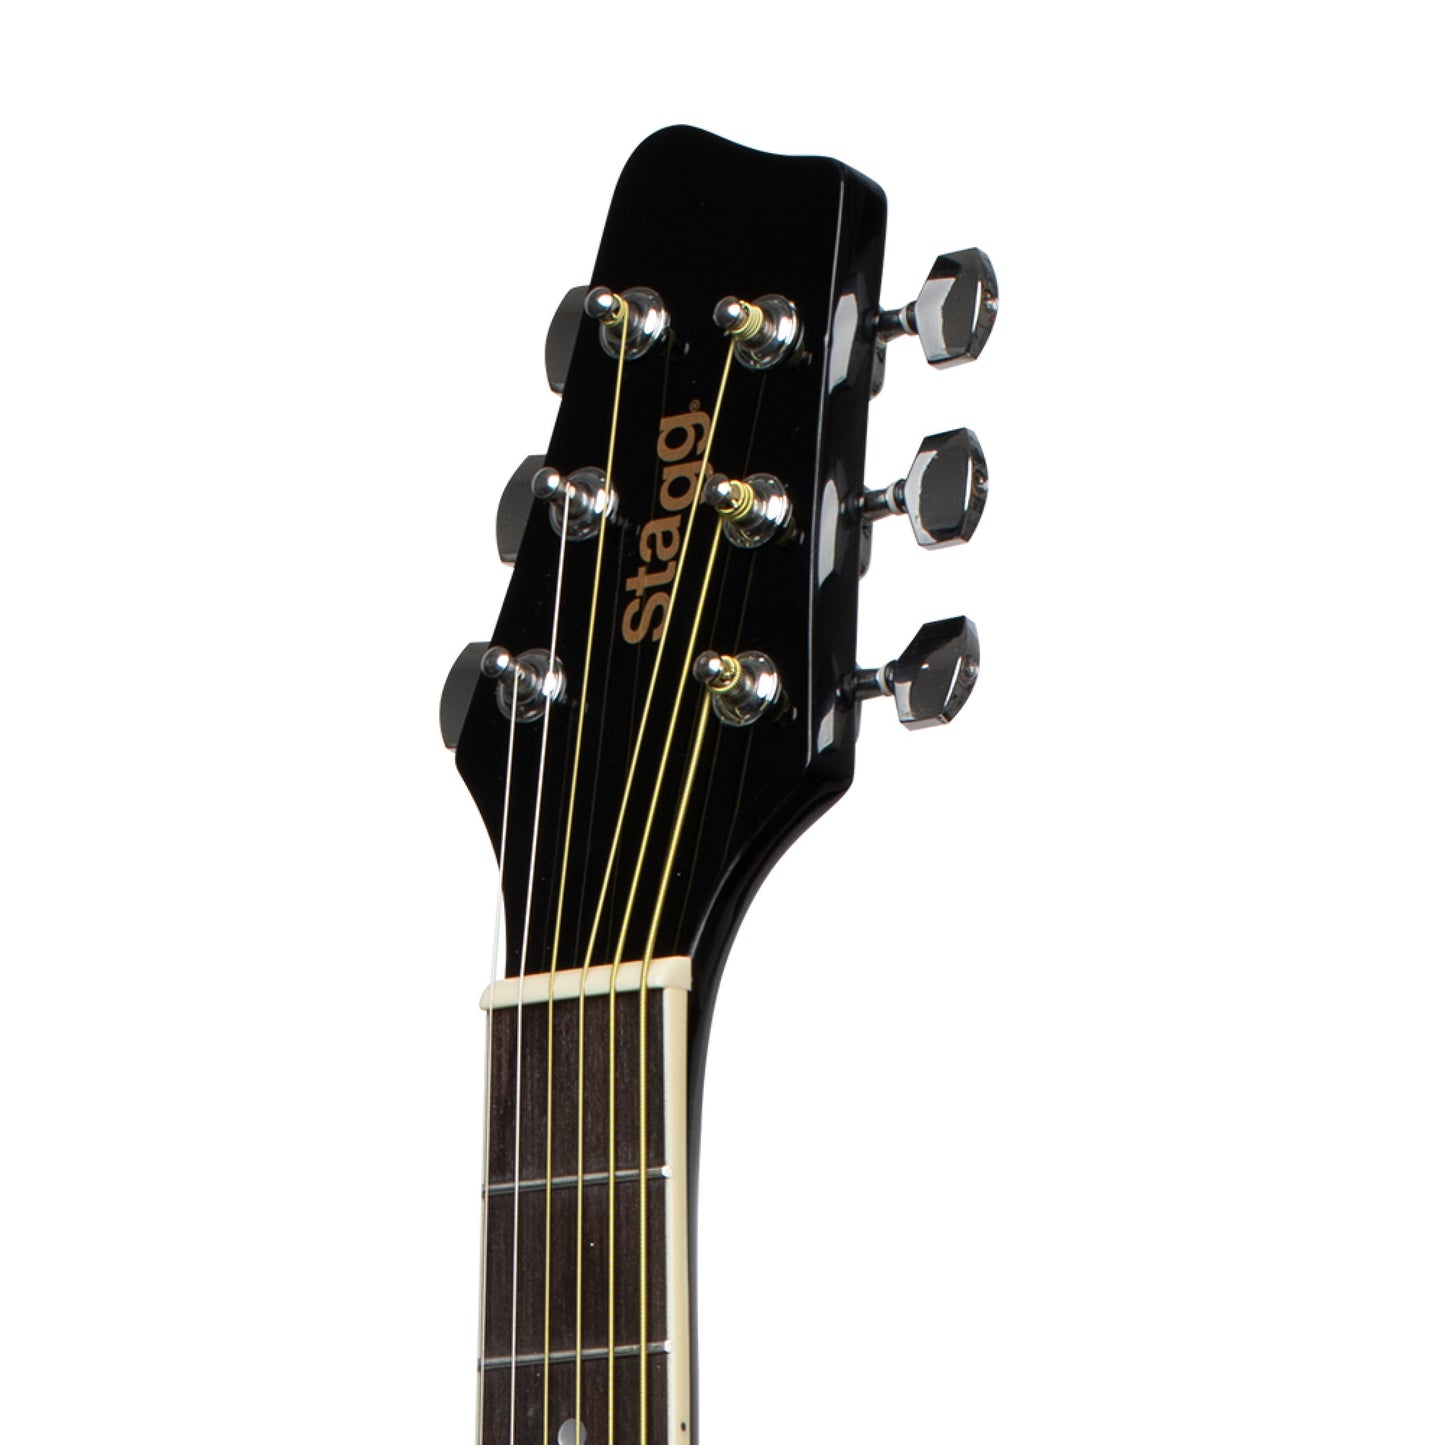 Stagg SA20D 3/4 Size Left Handed Acoustic Guitar in Black